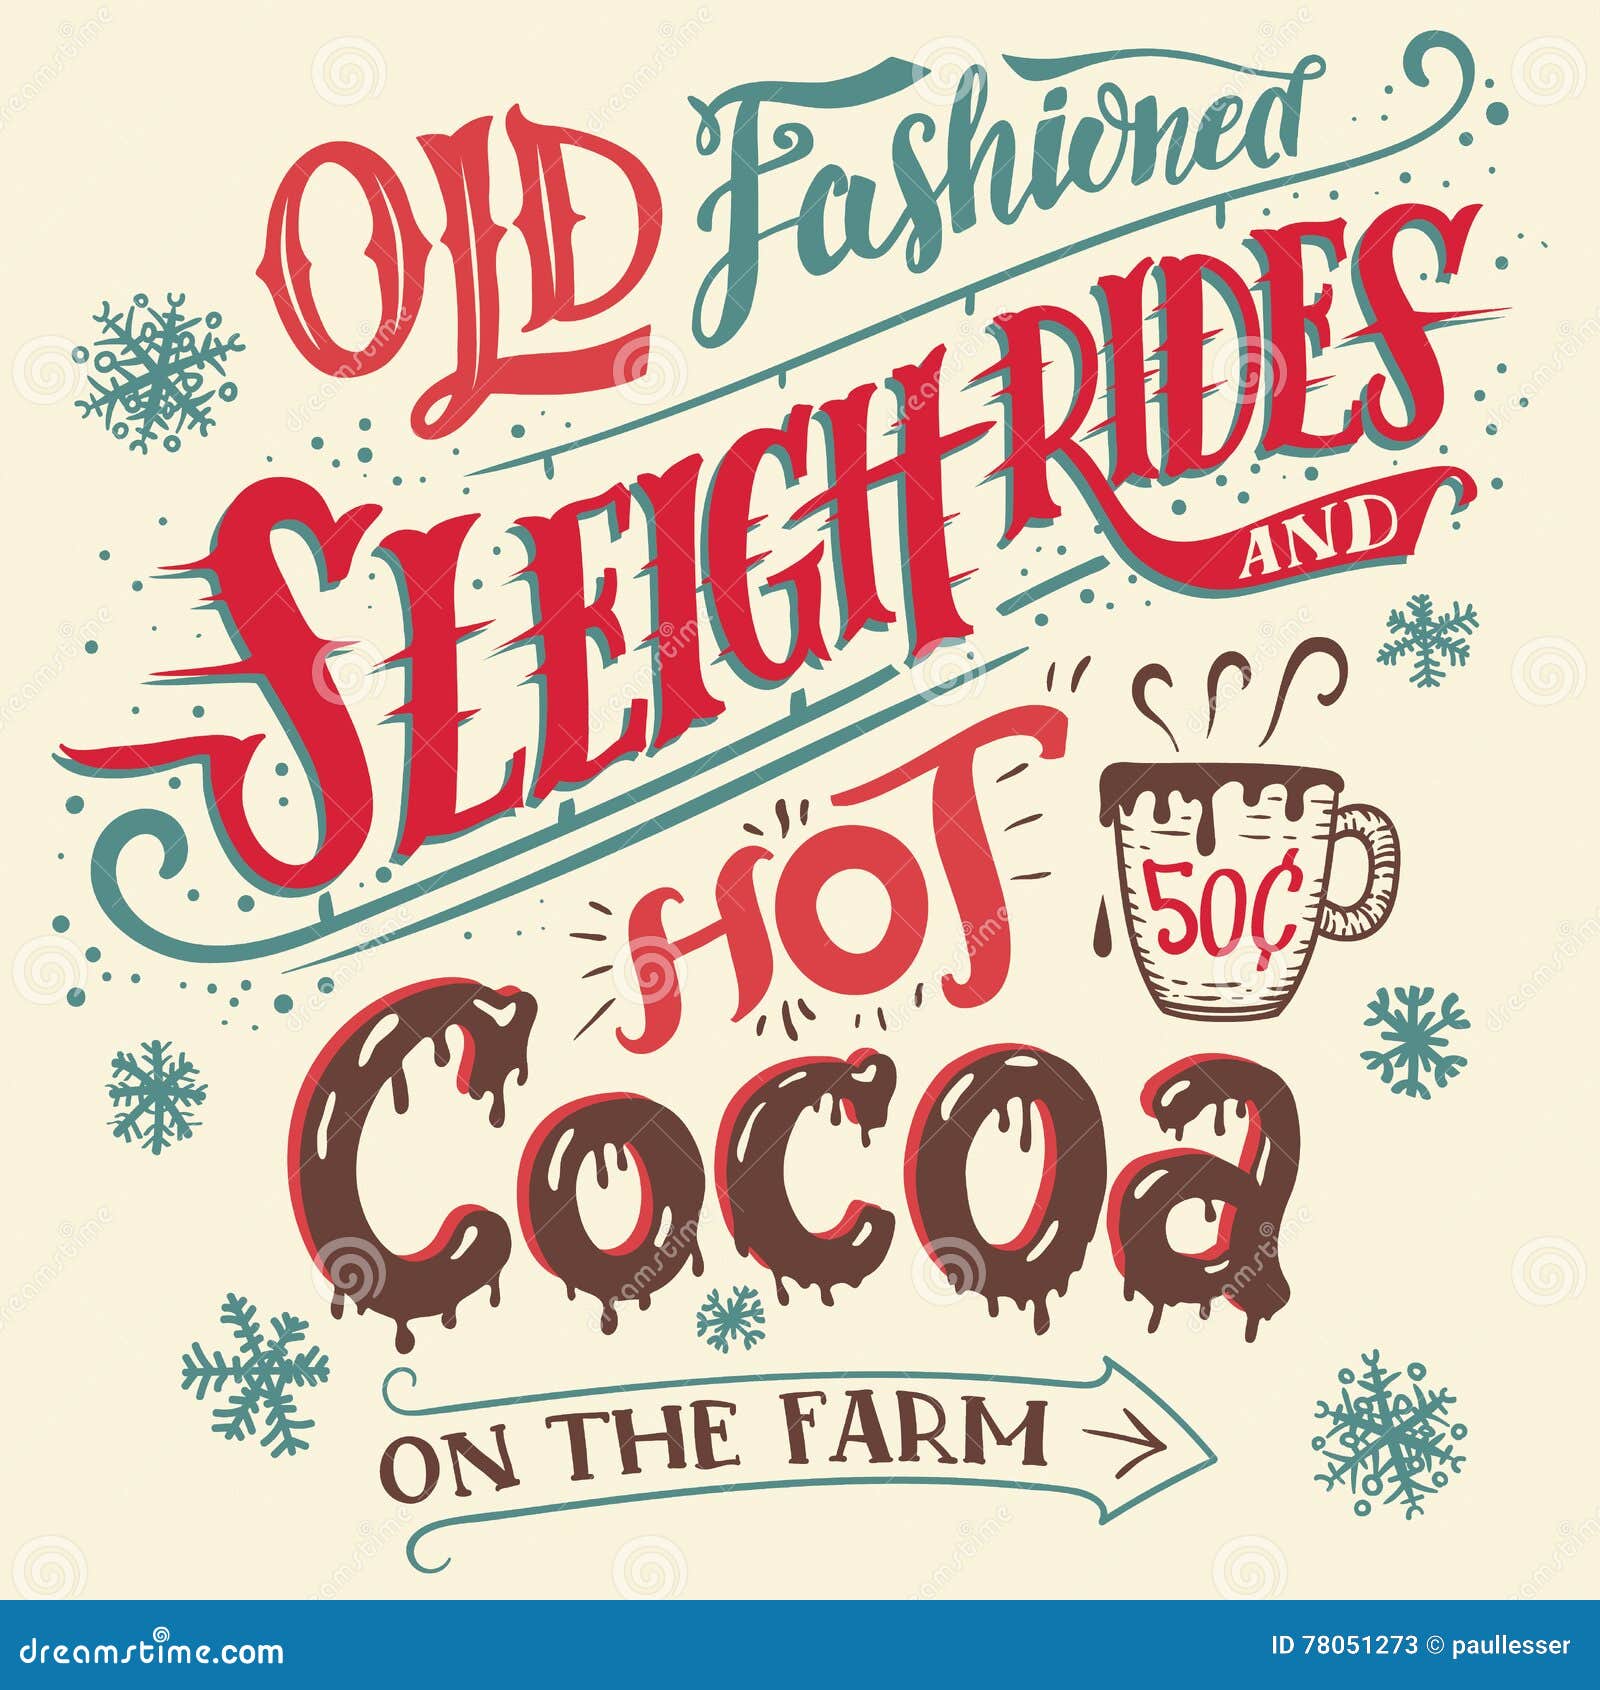 Download Old Fashioned Sleigh Rides And Hot Cocoa Card Stock Vector Illustration of farm